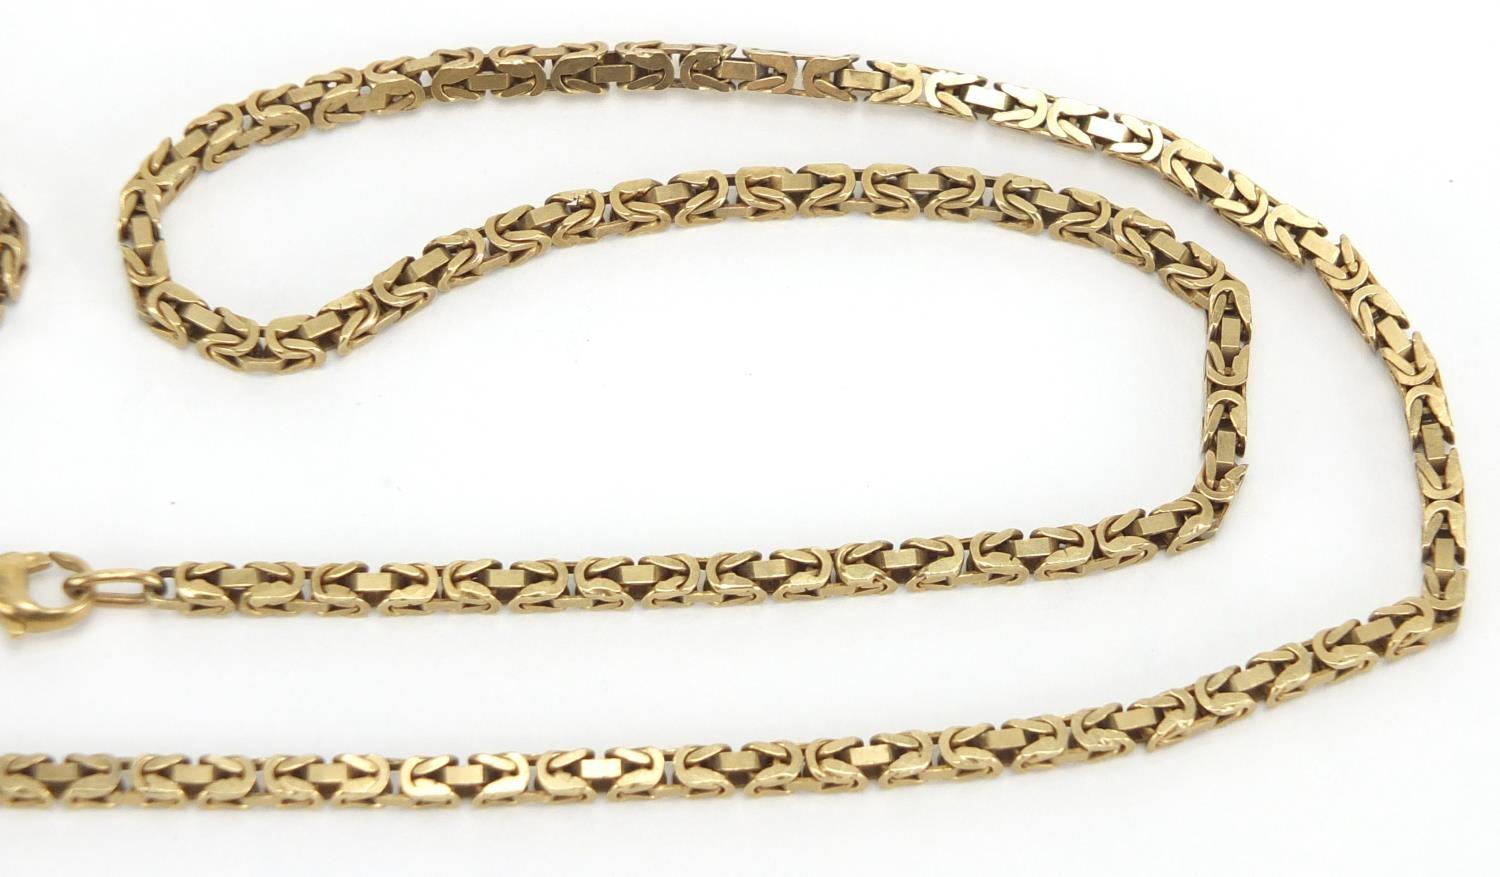 9ct gold Konigskette link necklace, 80cm in length, approximate weight 39.2g Further condition - Image 3 of 4